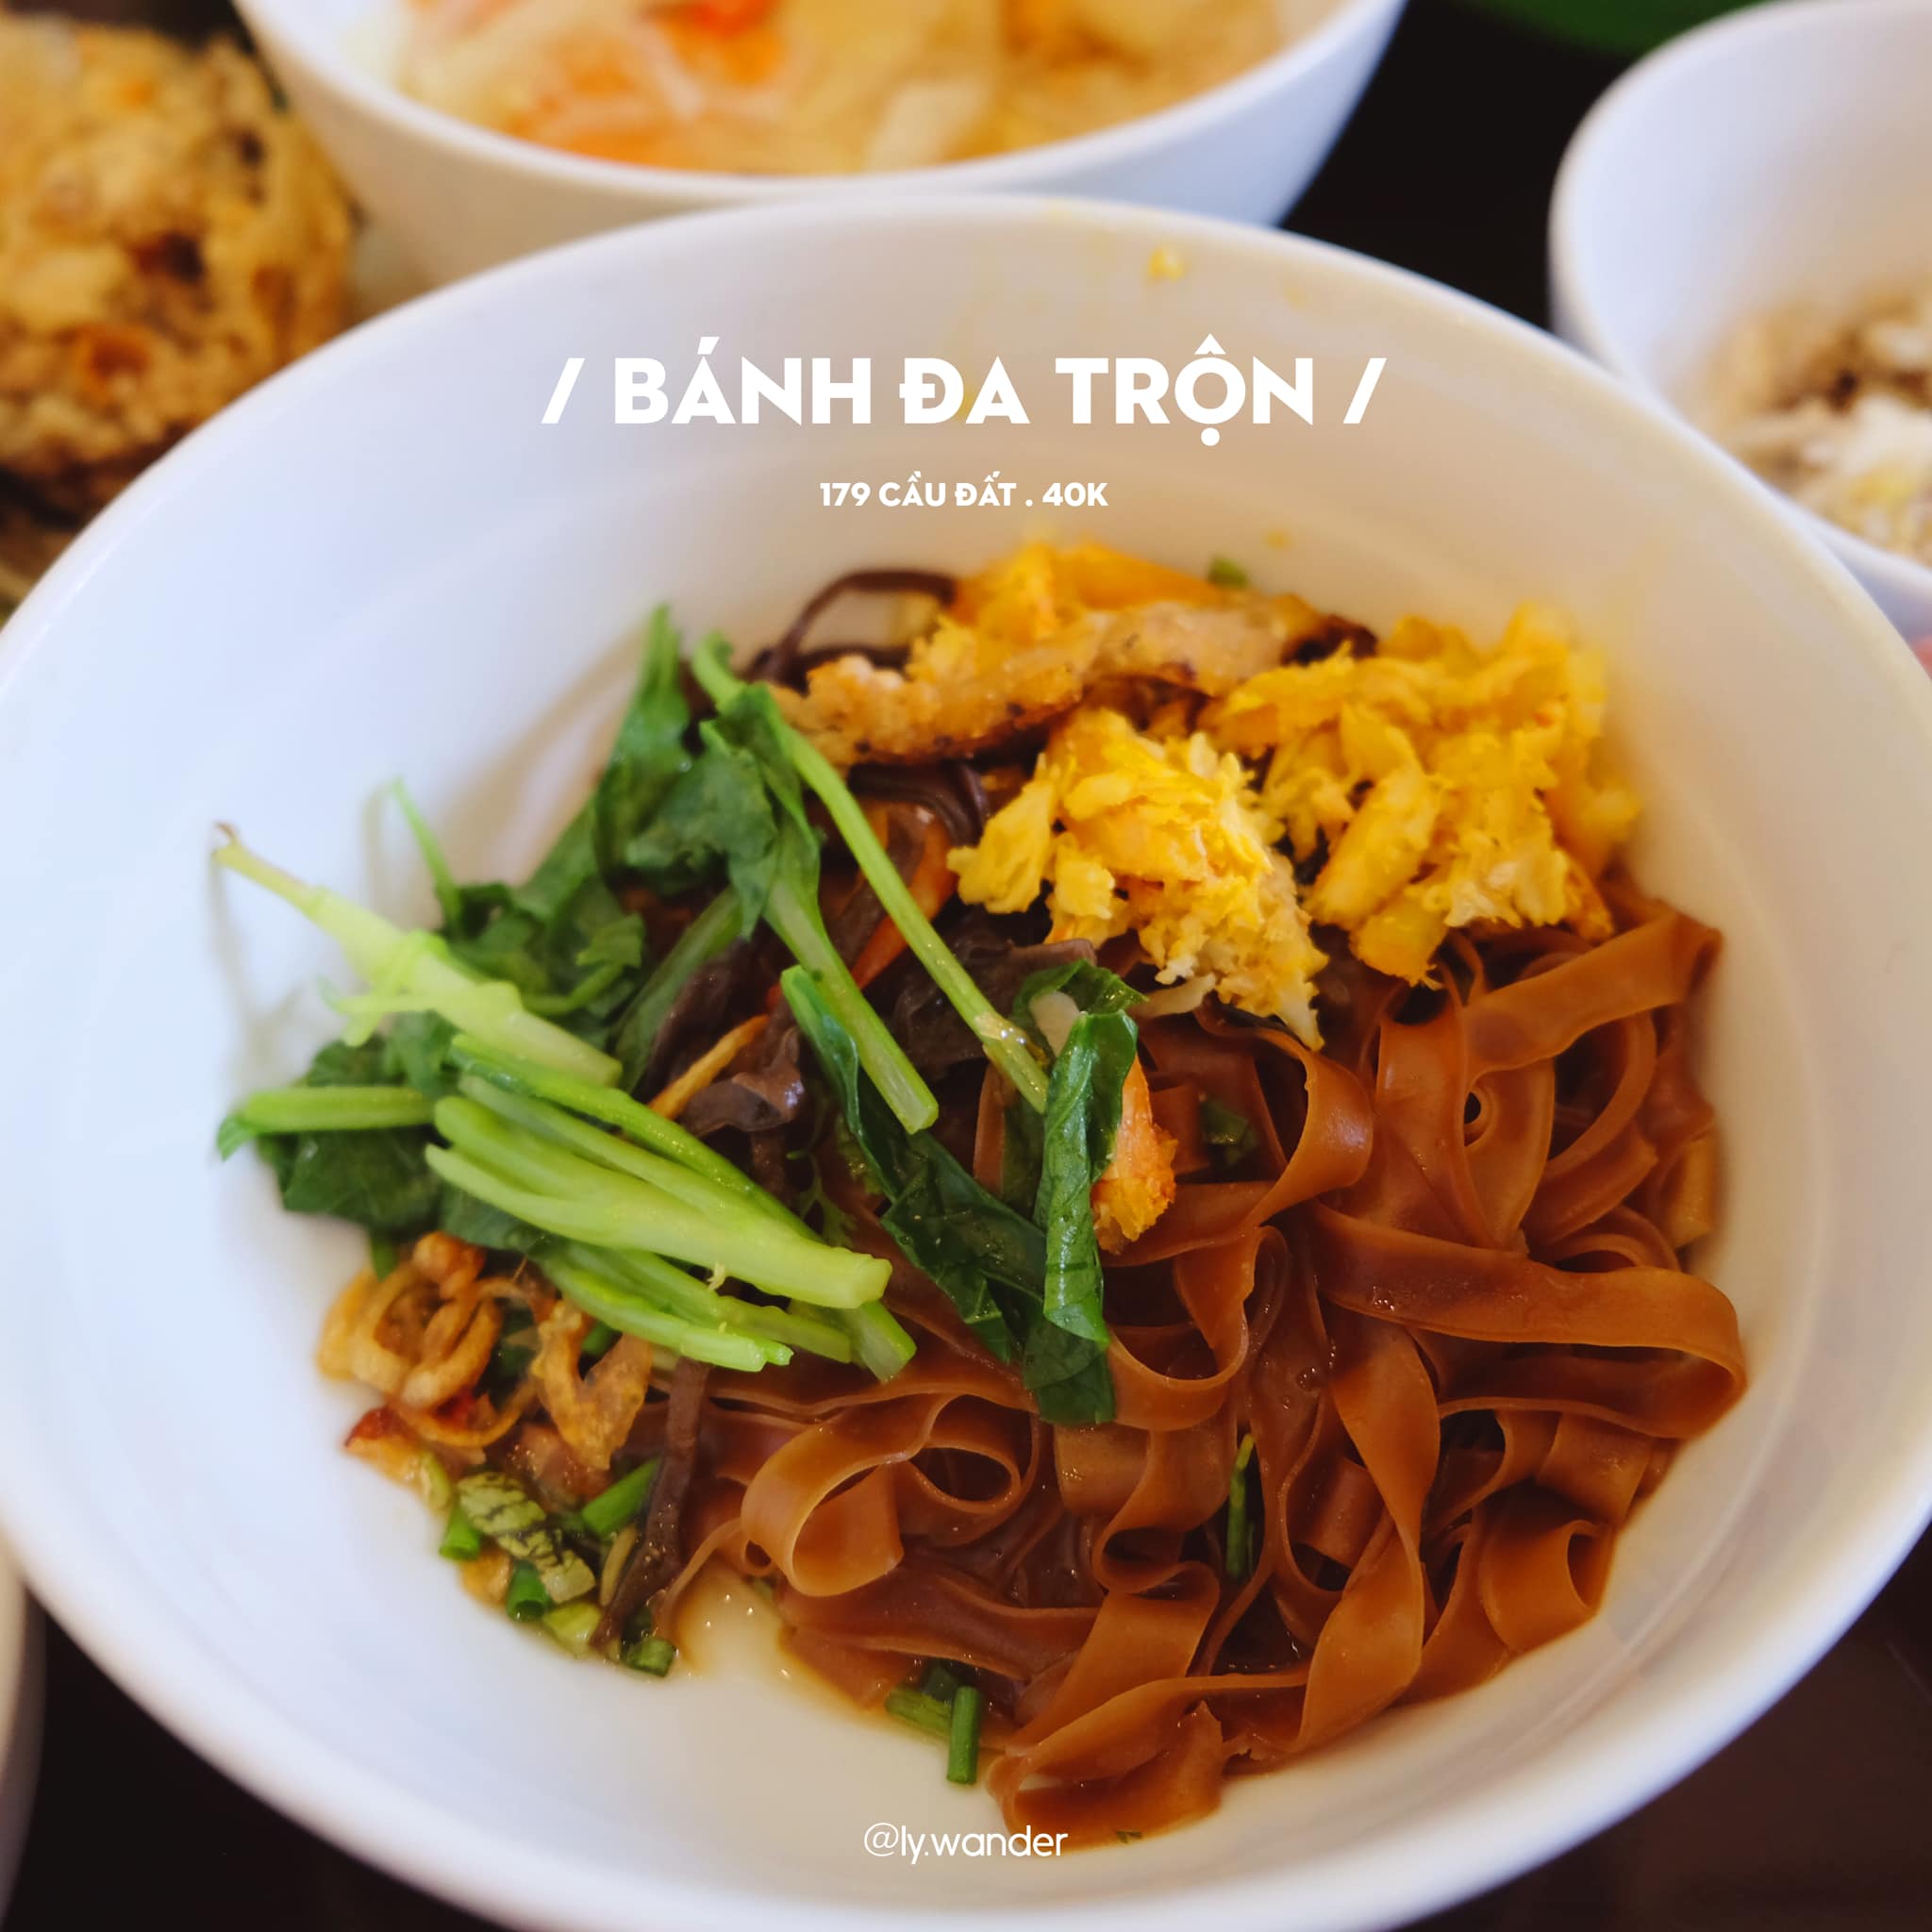 Banh da tron (Vietnamese crab noodles), which signature element is chewy banh da do (reddish-brown noodles) made from rice flour. Photo: Ly Nguyen / Tuoi Tre